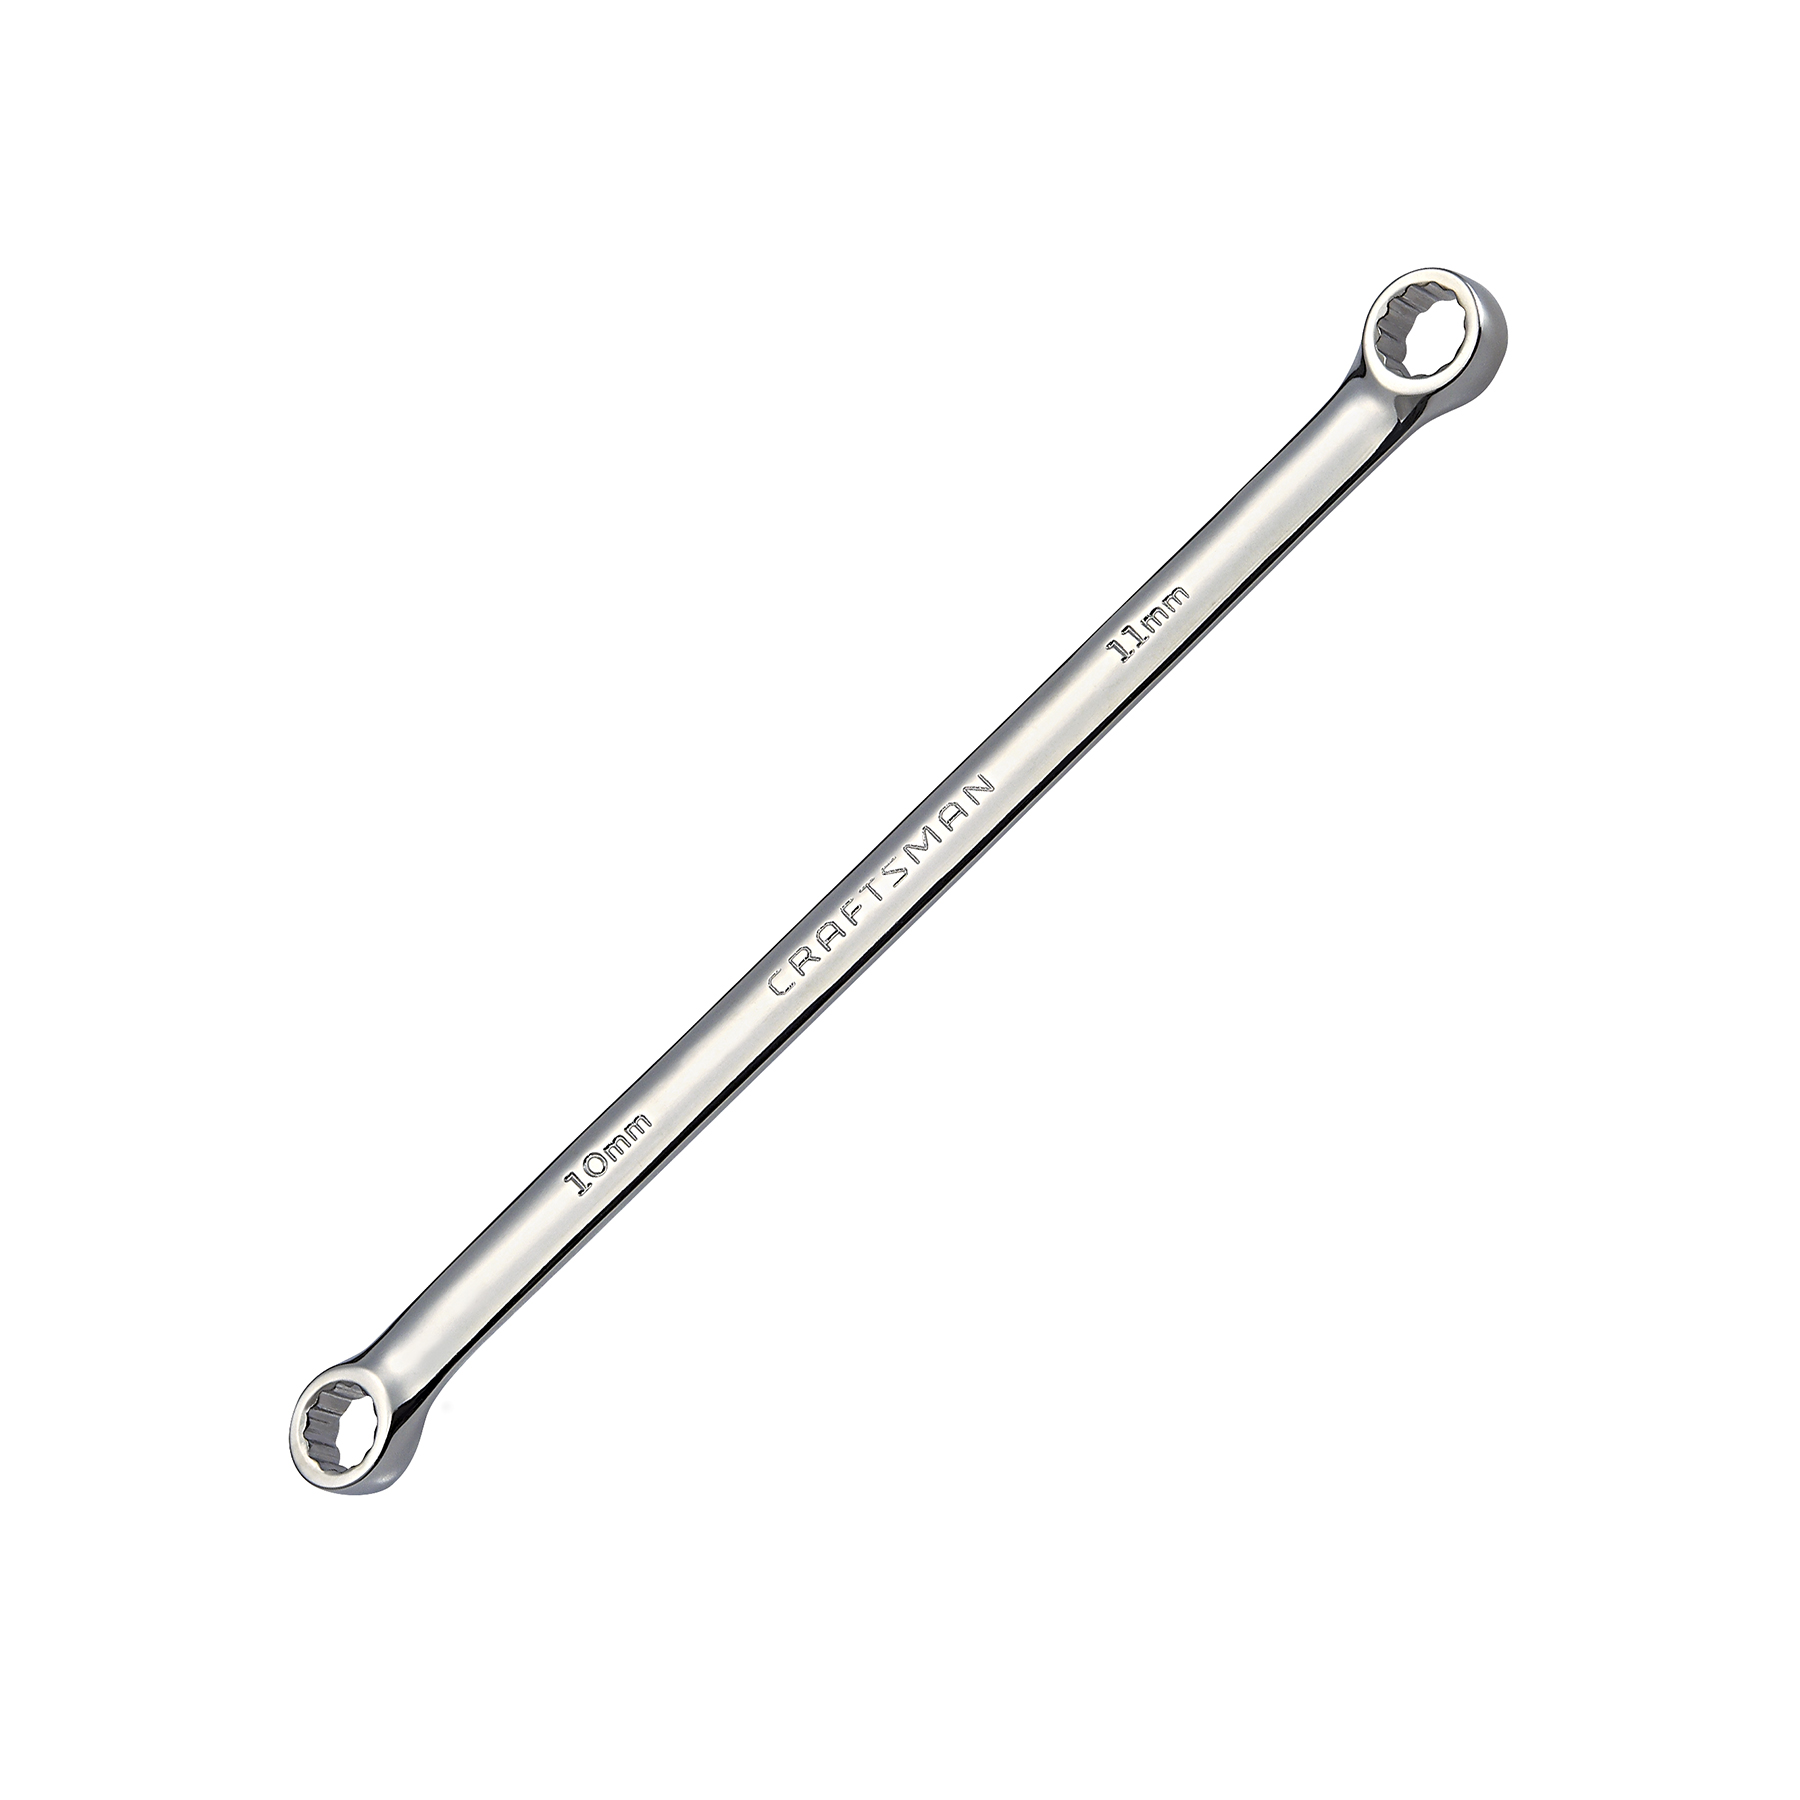 Craftsman 10mm x 11mm Box End 12 Point Wrench